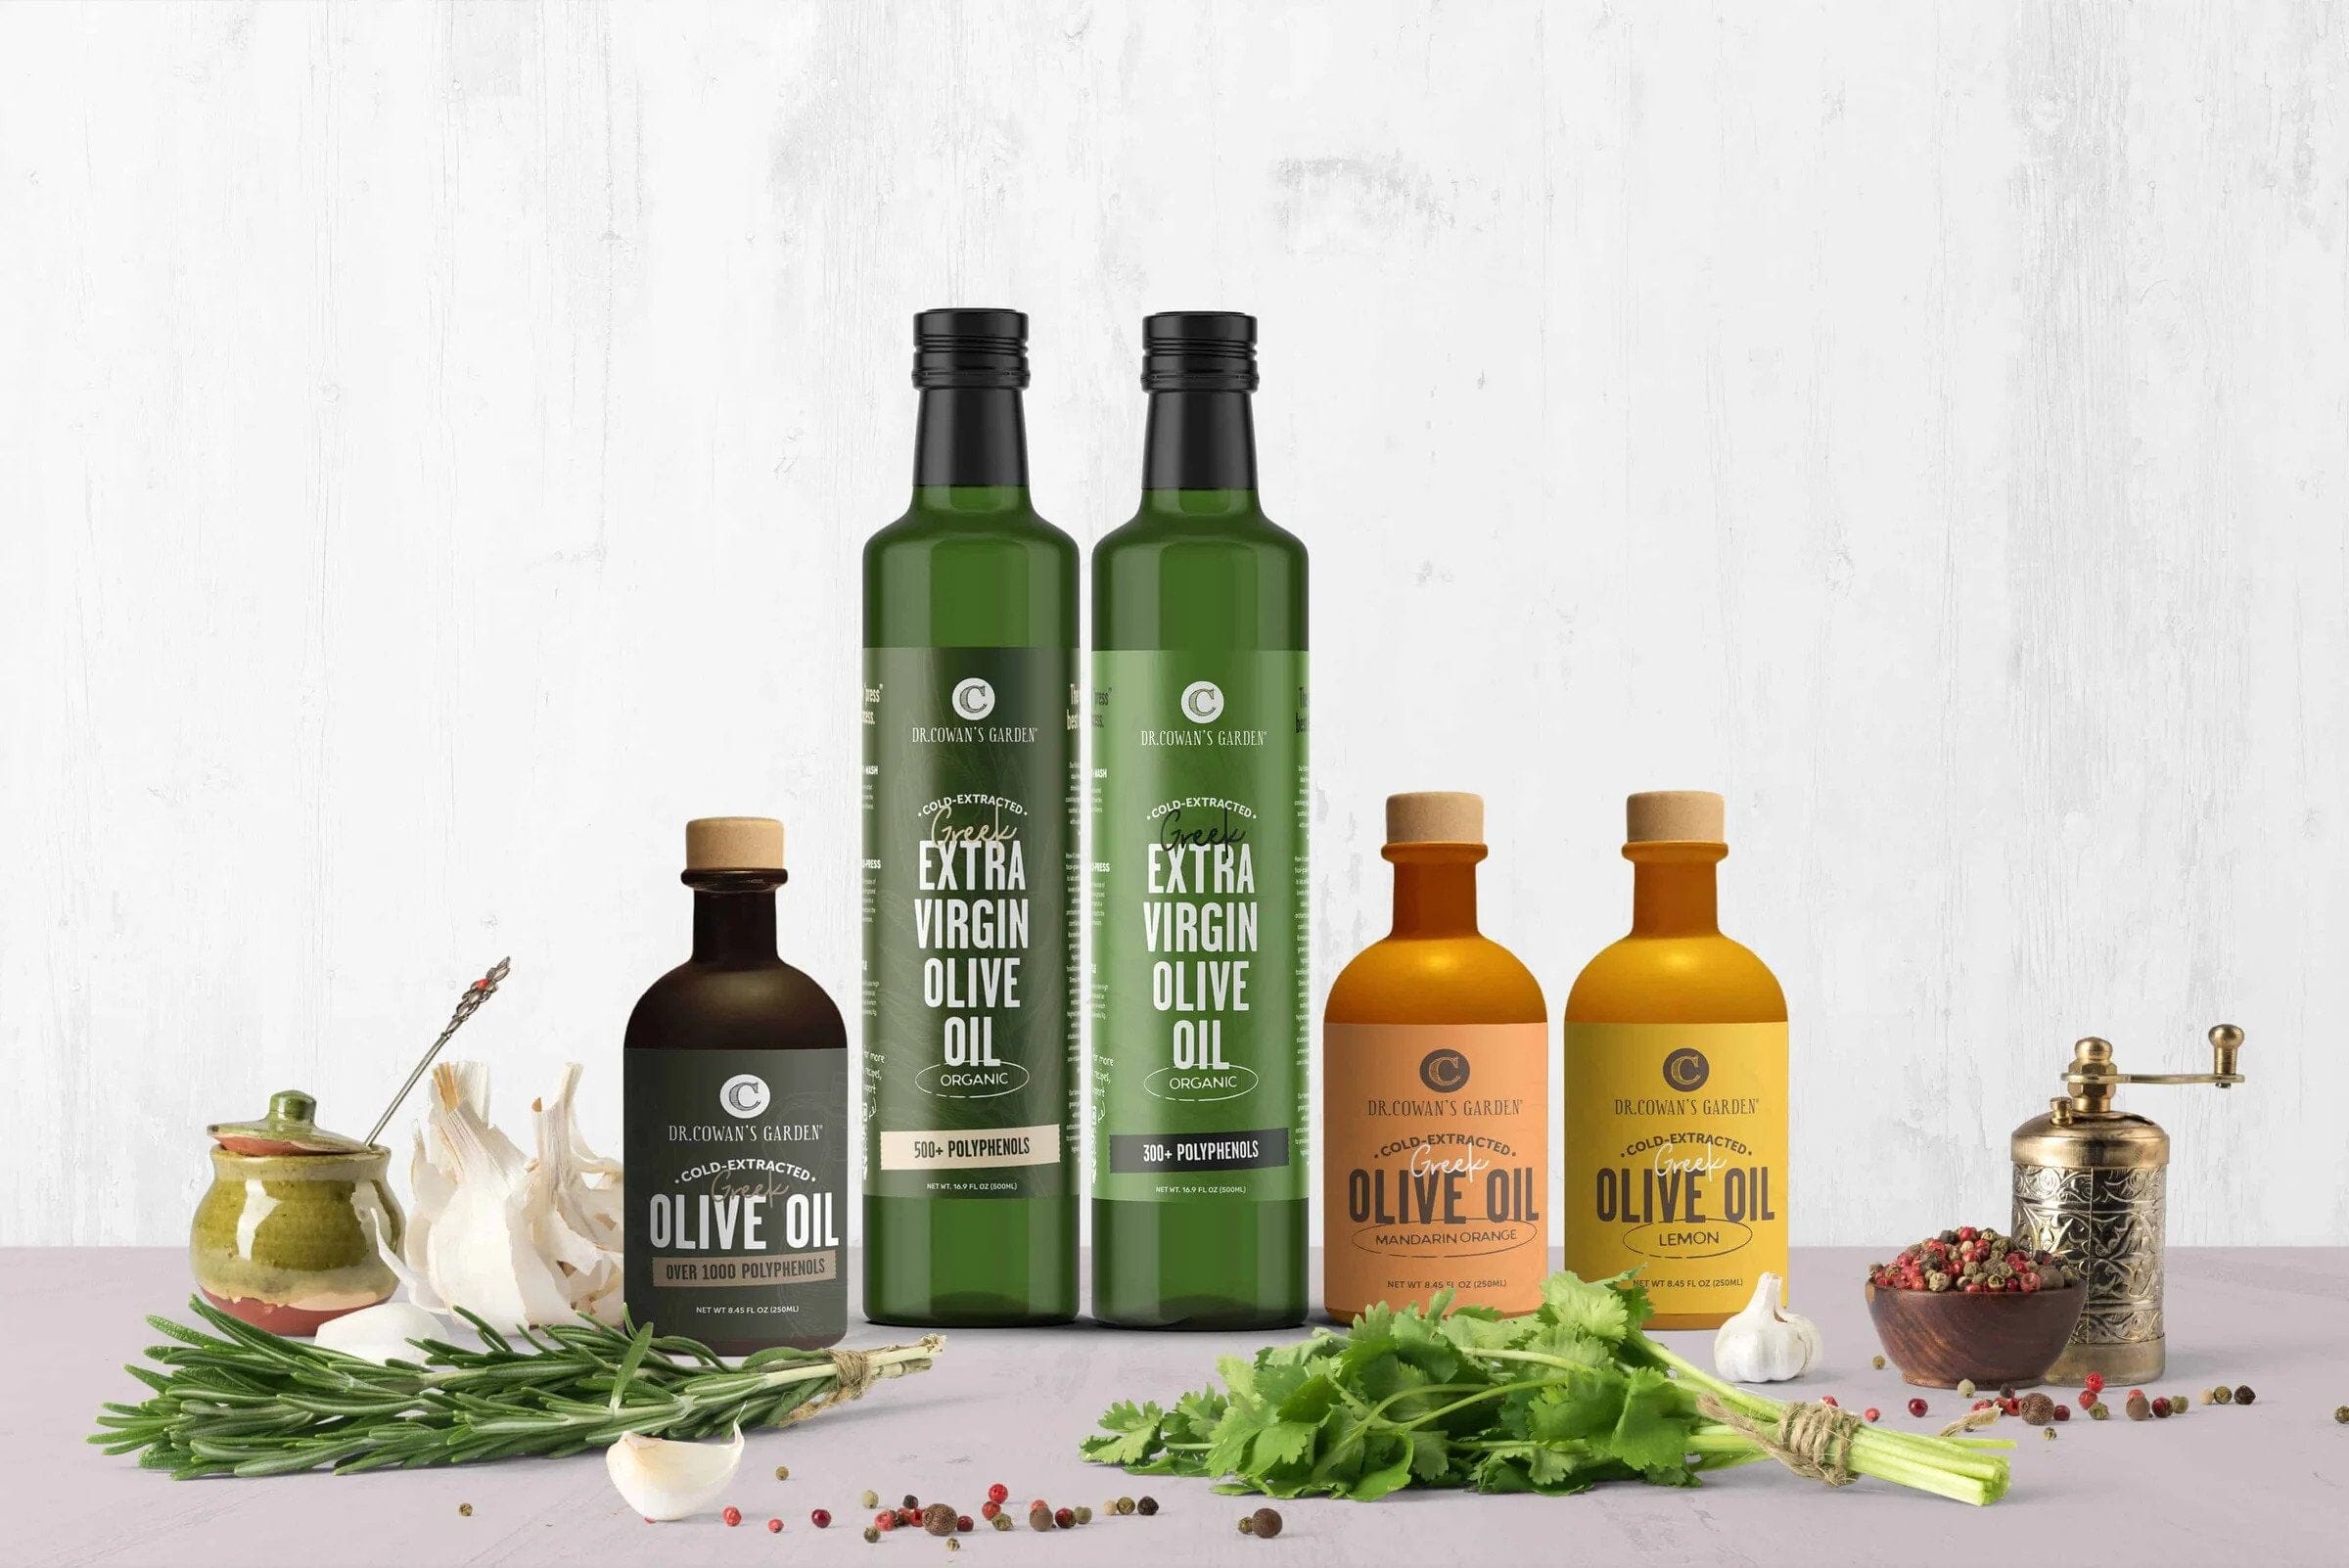 Our Olive Oil Is Simply the Best – Dr. Cowan's Garden